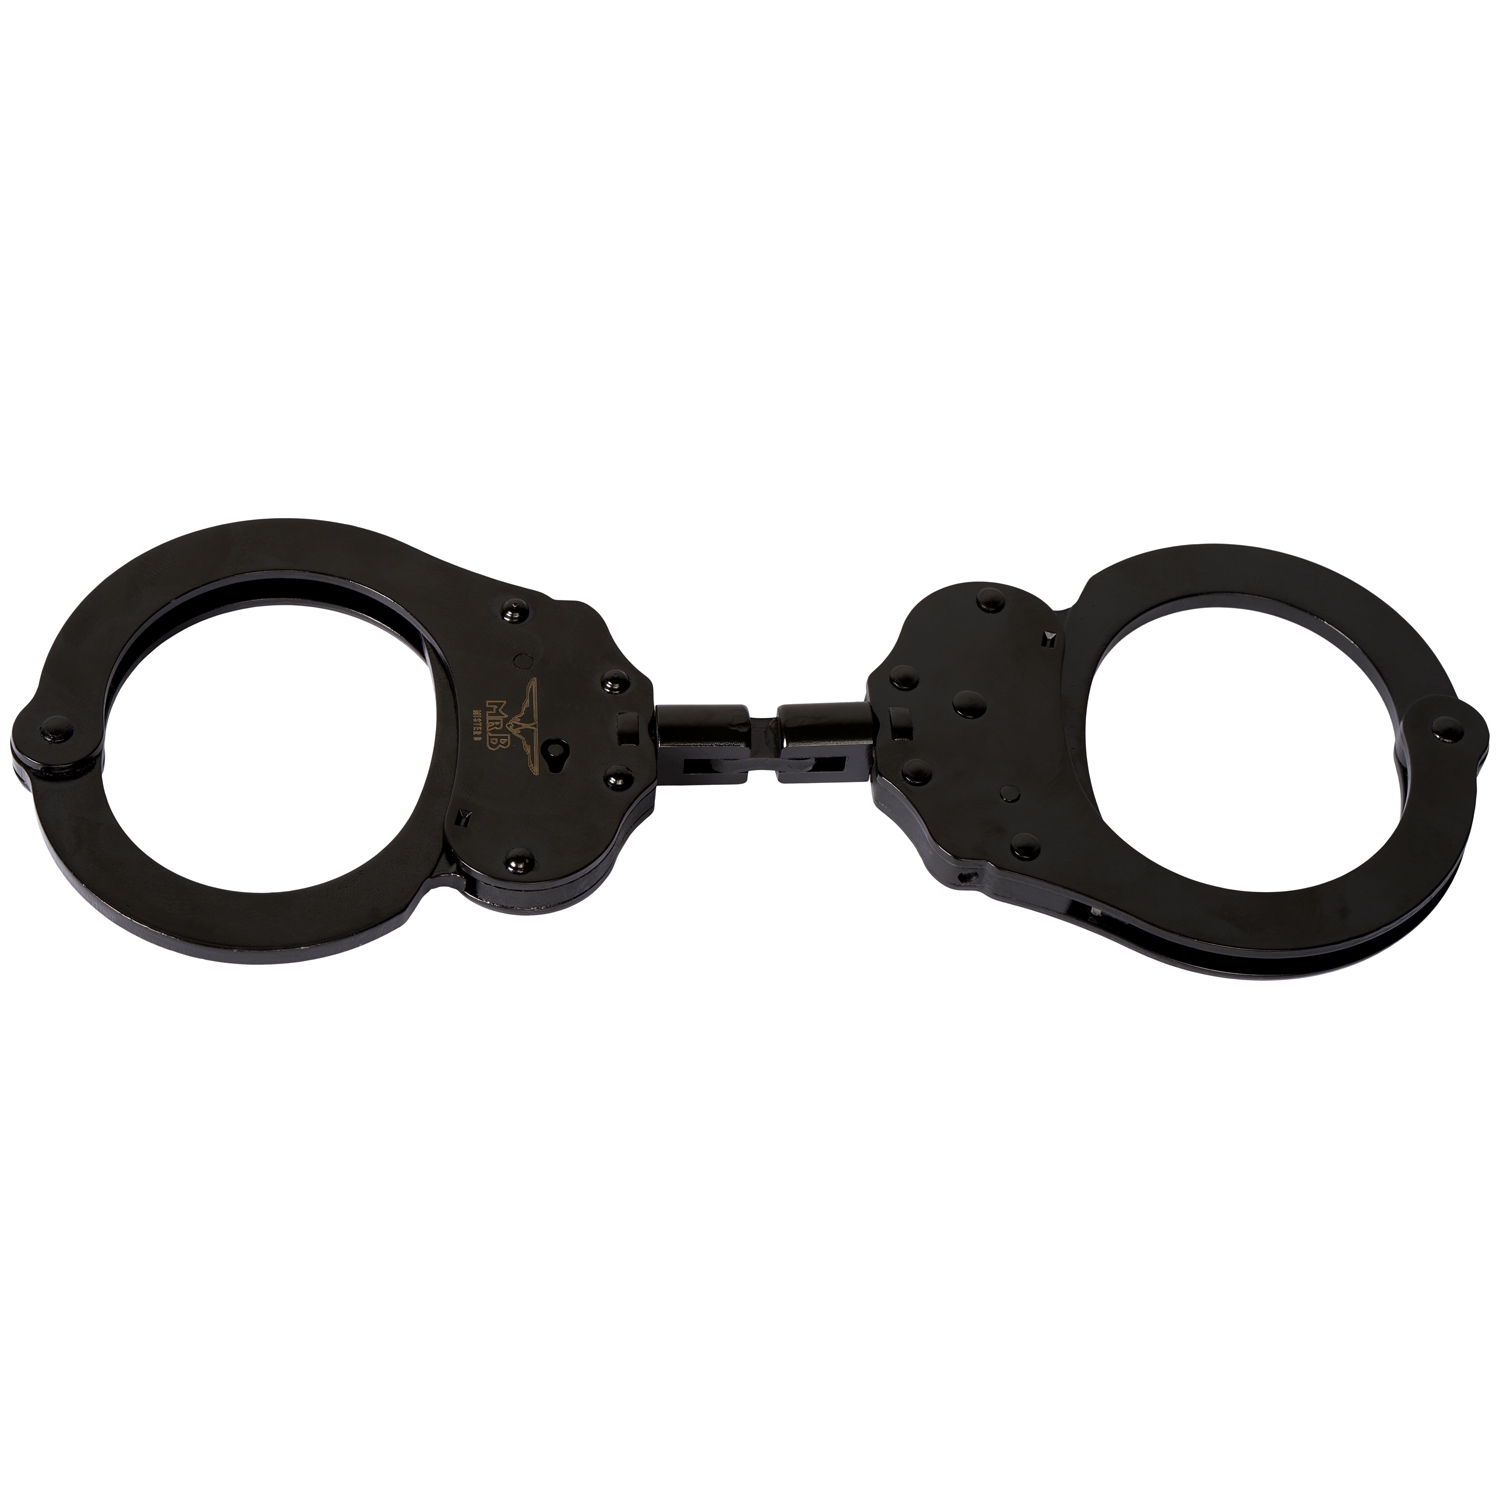 Mister B Cuff Double Lock with Hoop Black - Sort thumbnail